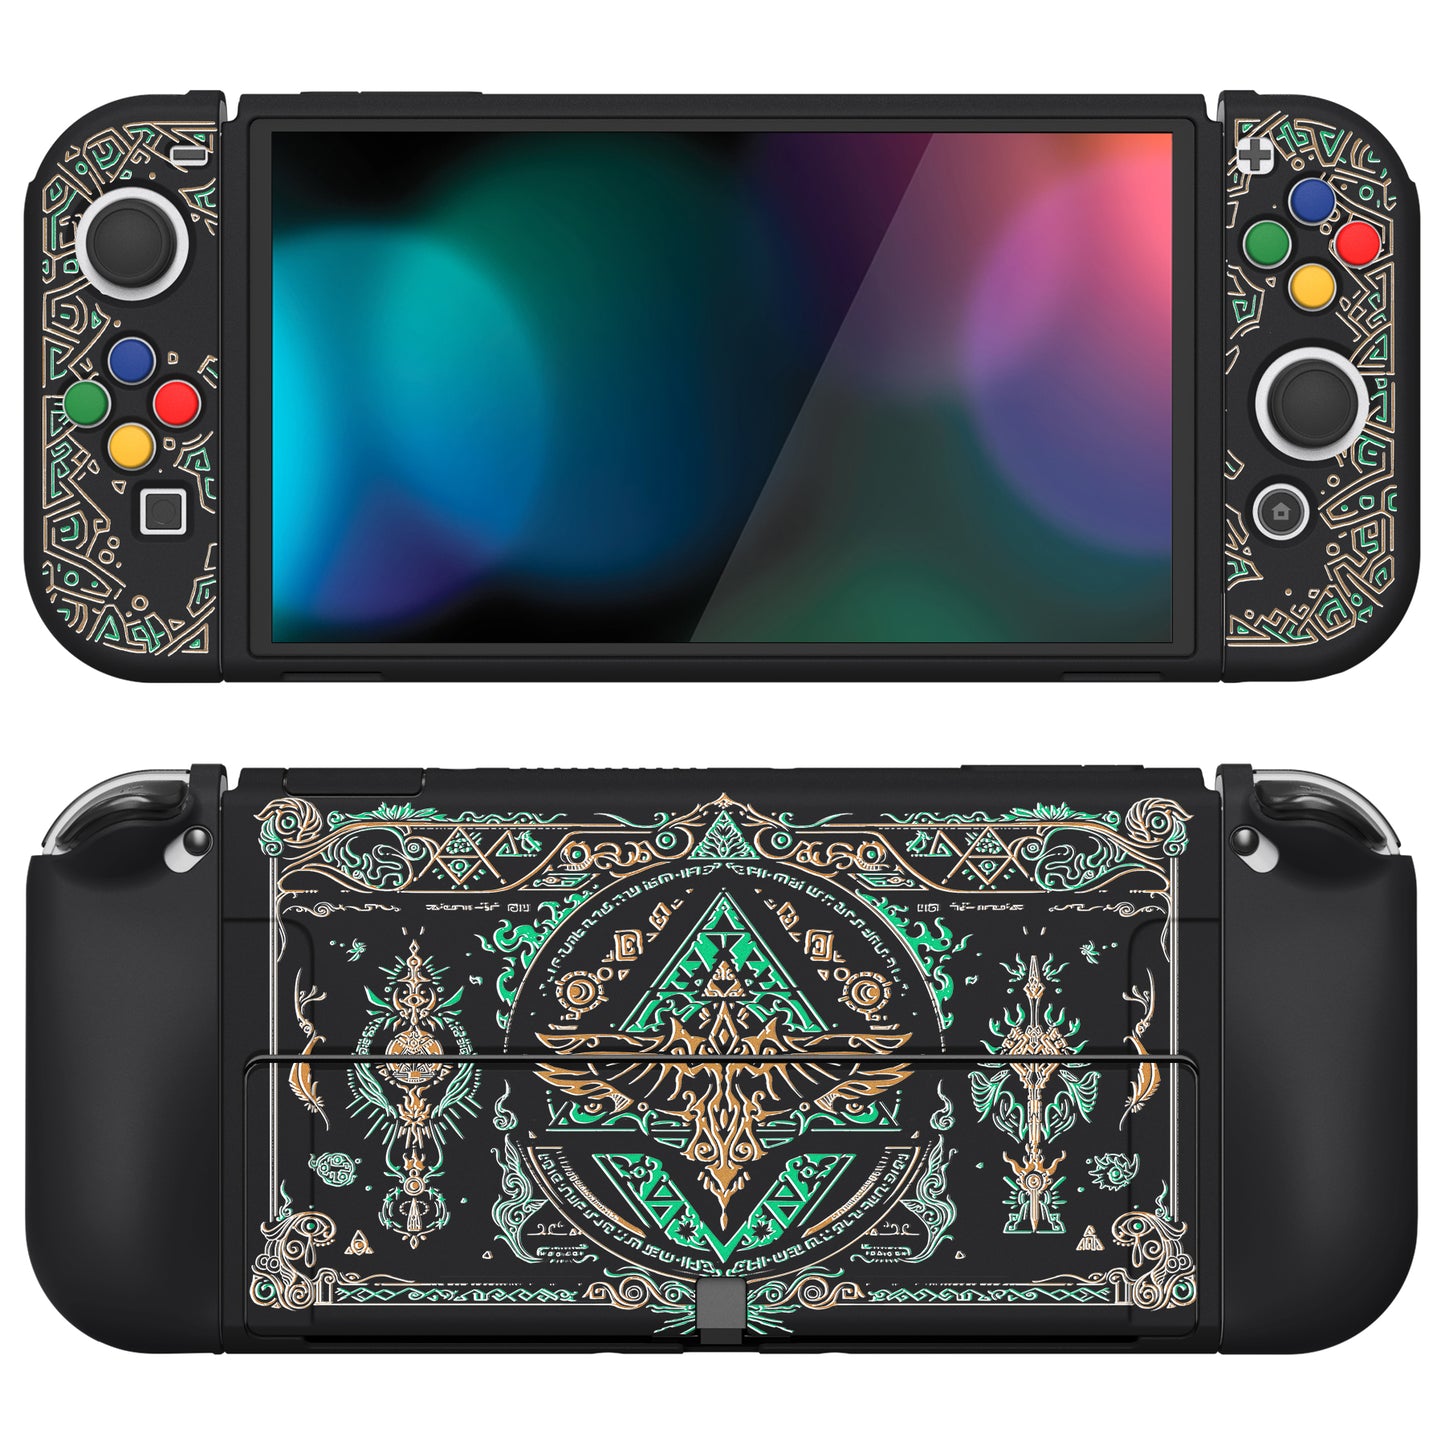 PlayVital ZealProtect Soft Protective Case for Switch OLED, Flexible Protector Joycon Grip Cover for Switch OLED with Thumb Grip Caps & ABXY Direction Button Caps - Totem of Kingdom -XSOYV6028 playvital